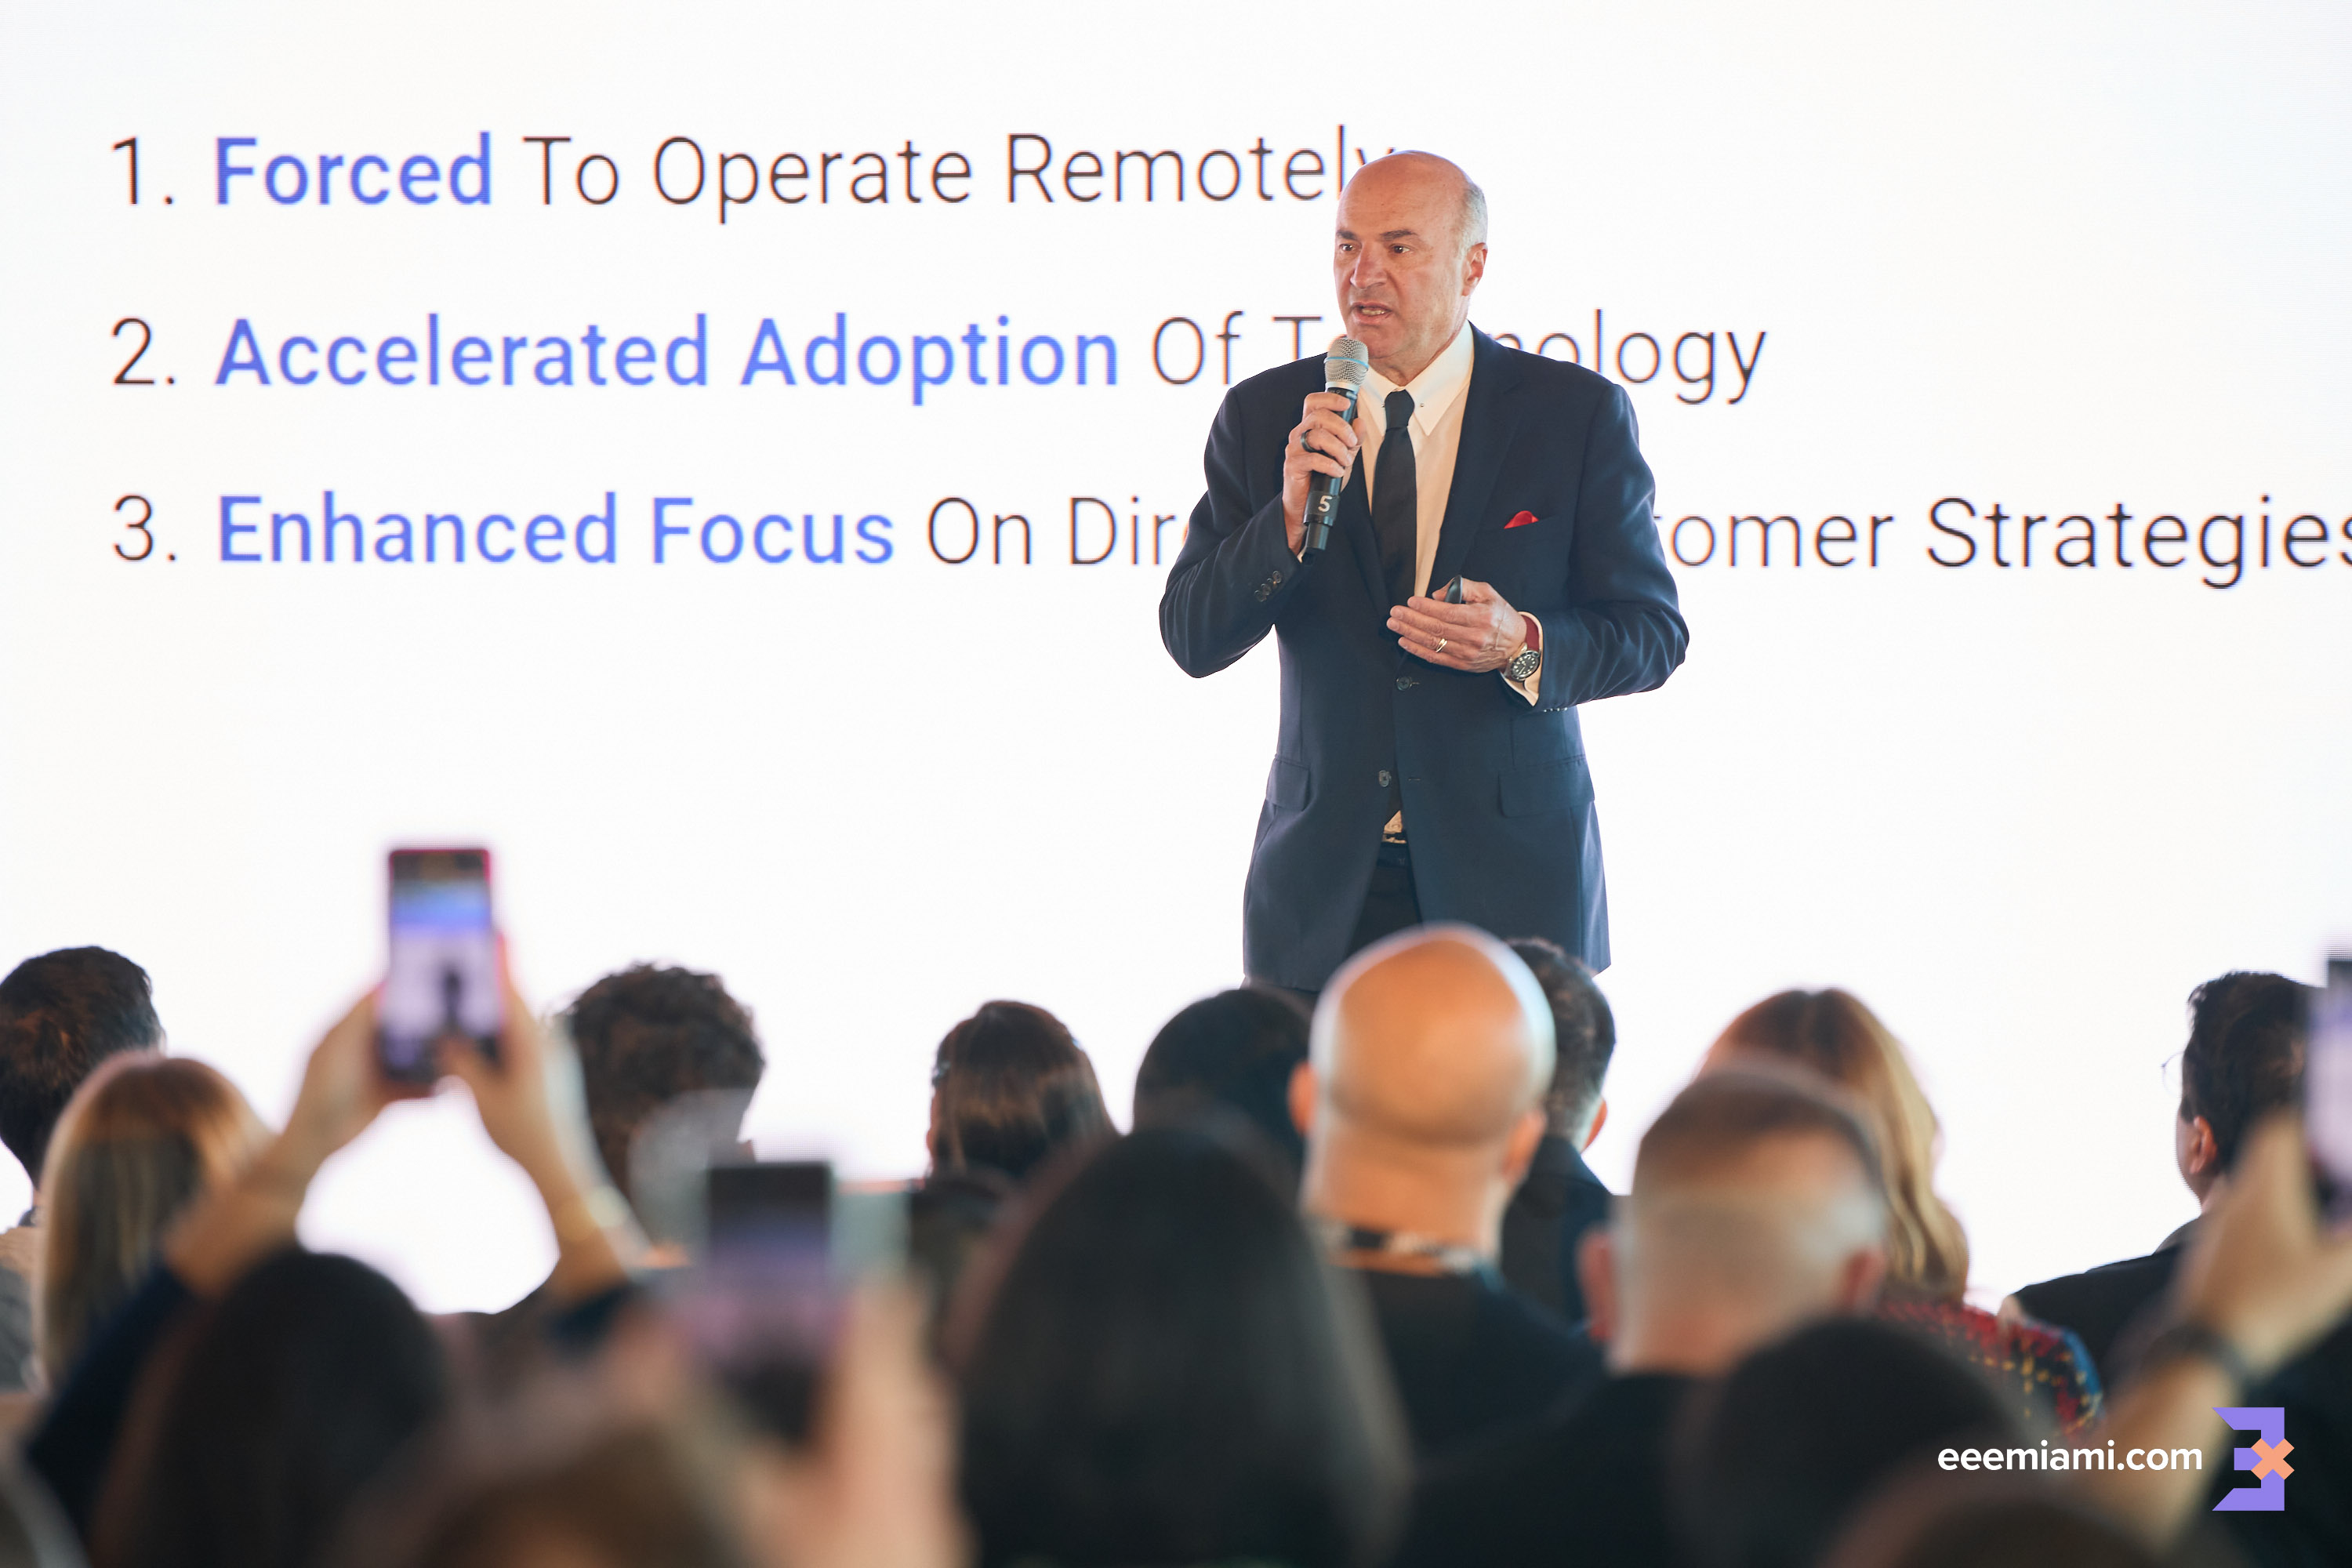 Kevin O'Leary at EEE Miami 2023